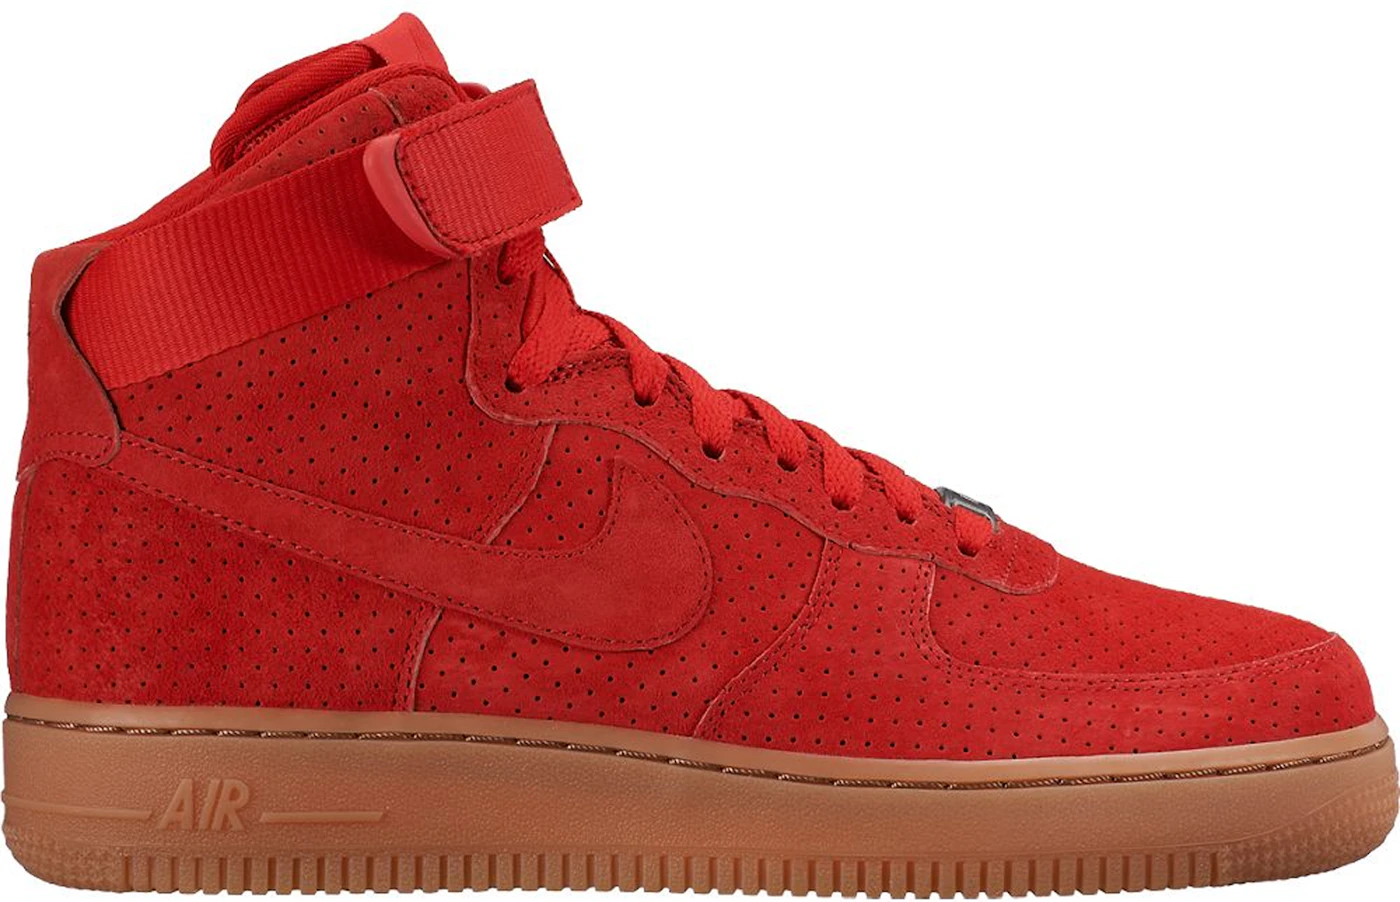 Nike Force High Red Gum (Women's) - 749266-601 - US